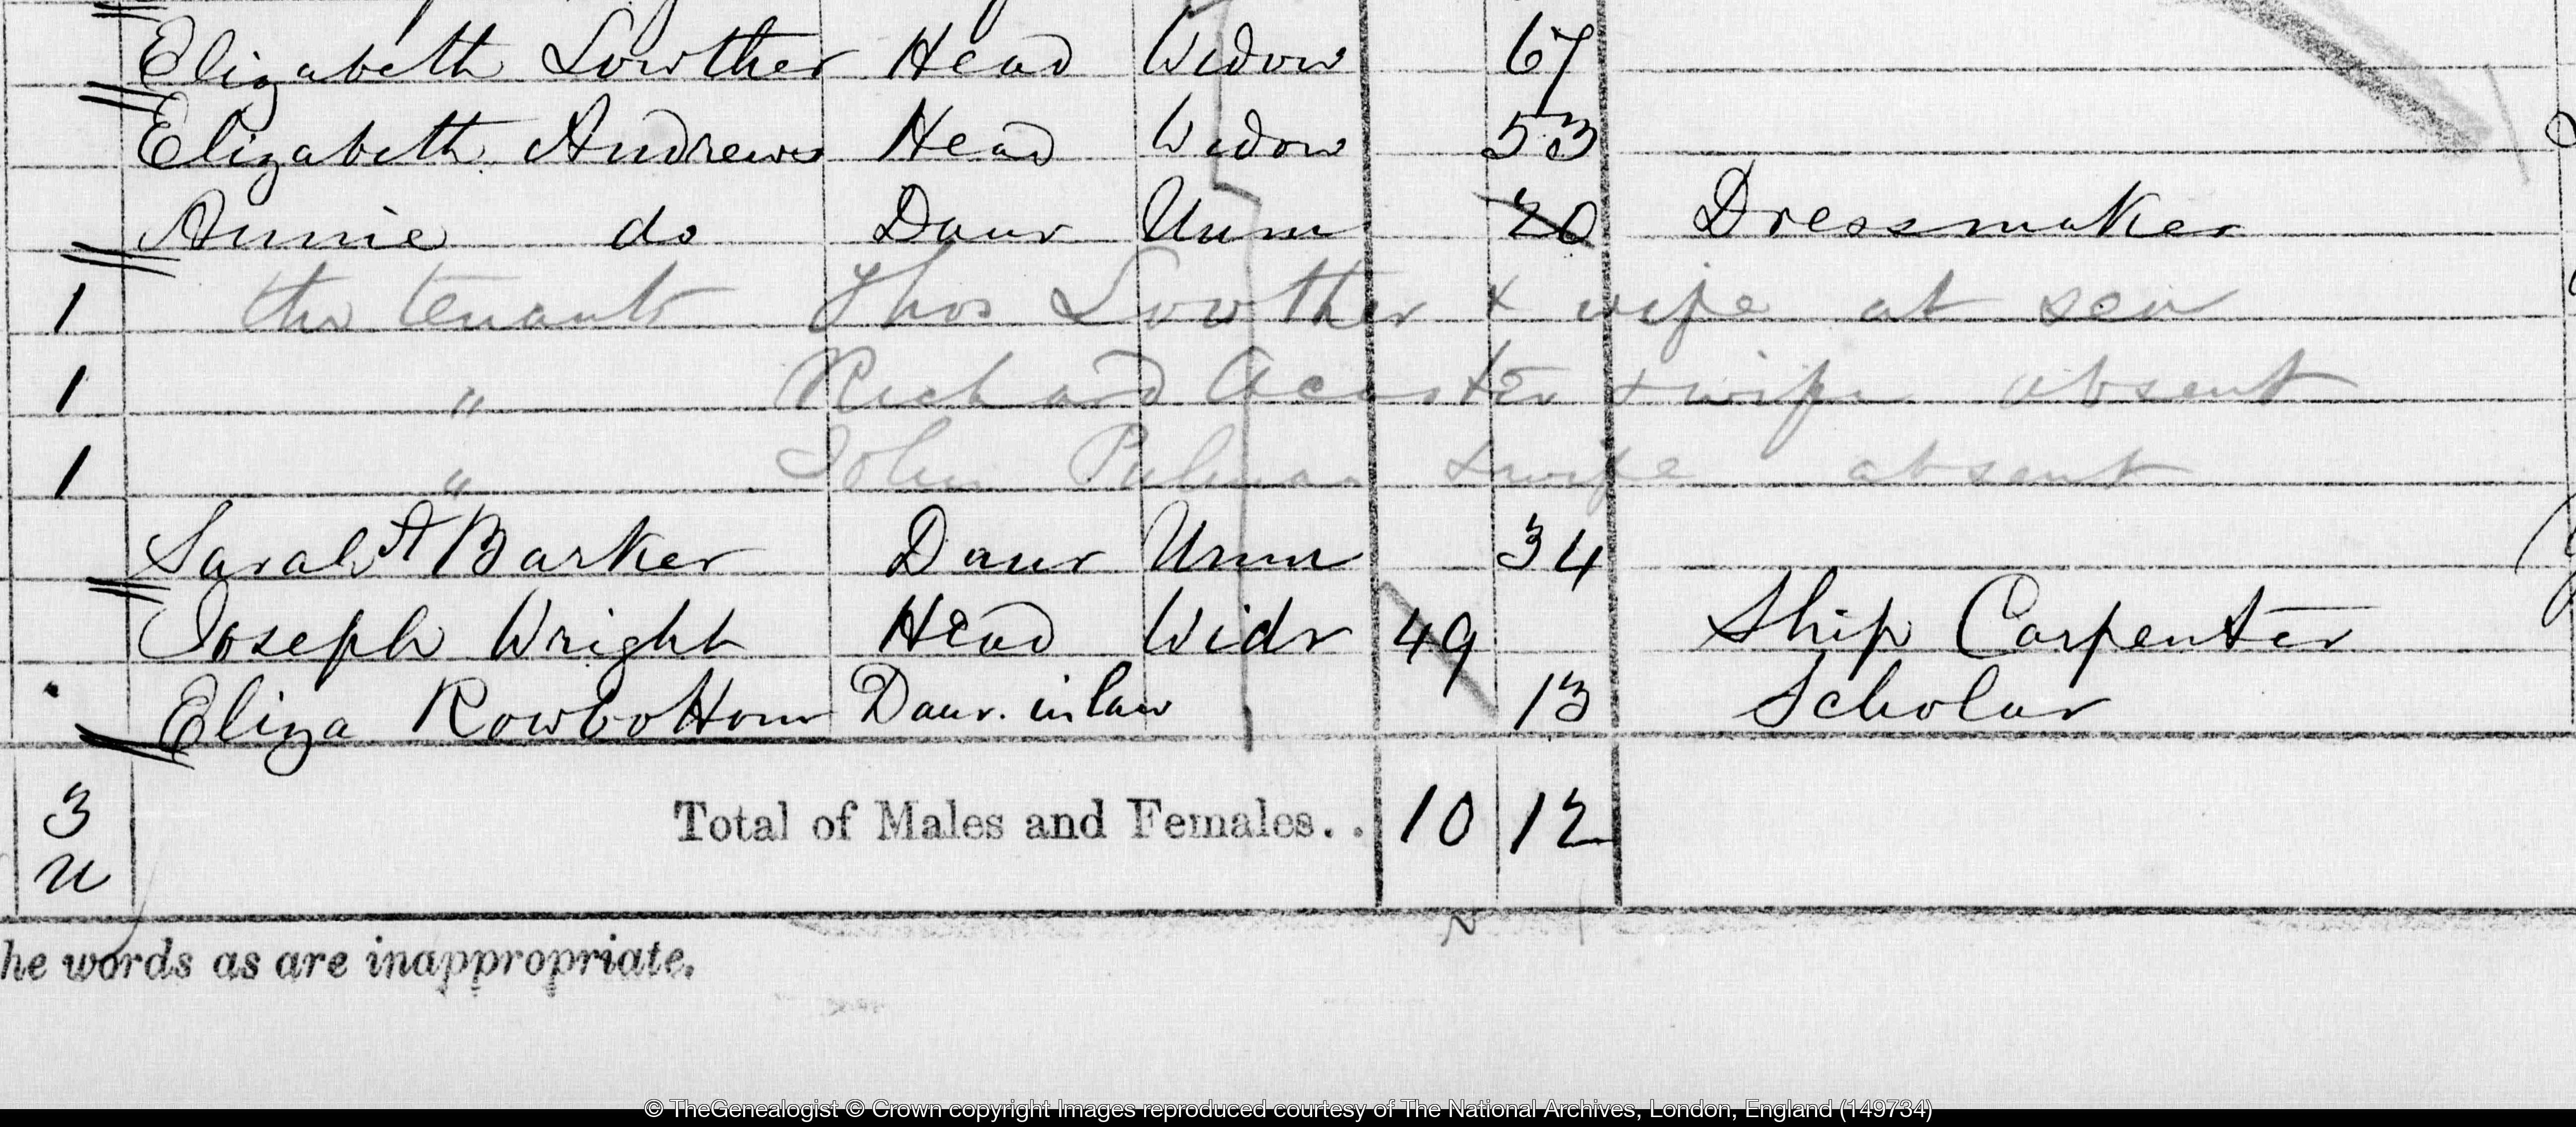 Pencil notes on the page unusually tell us about six people absent on census night